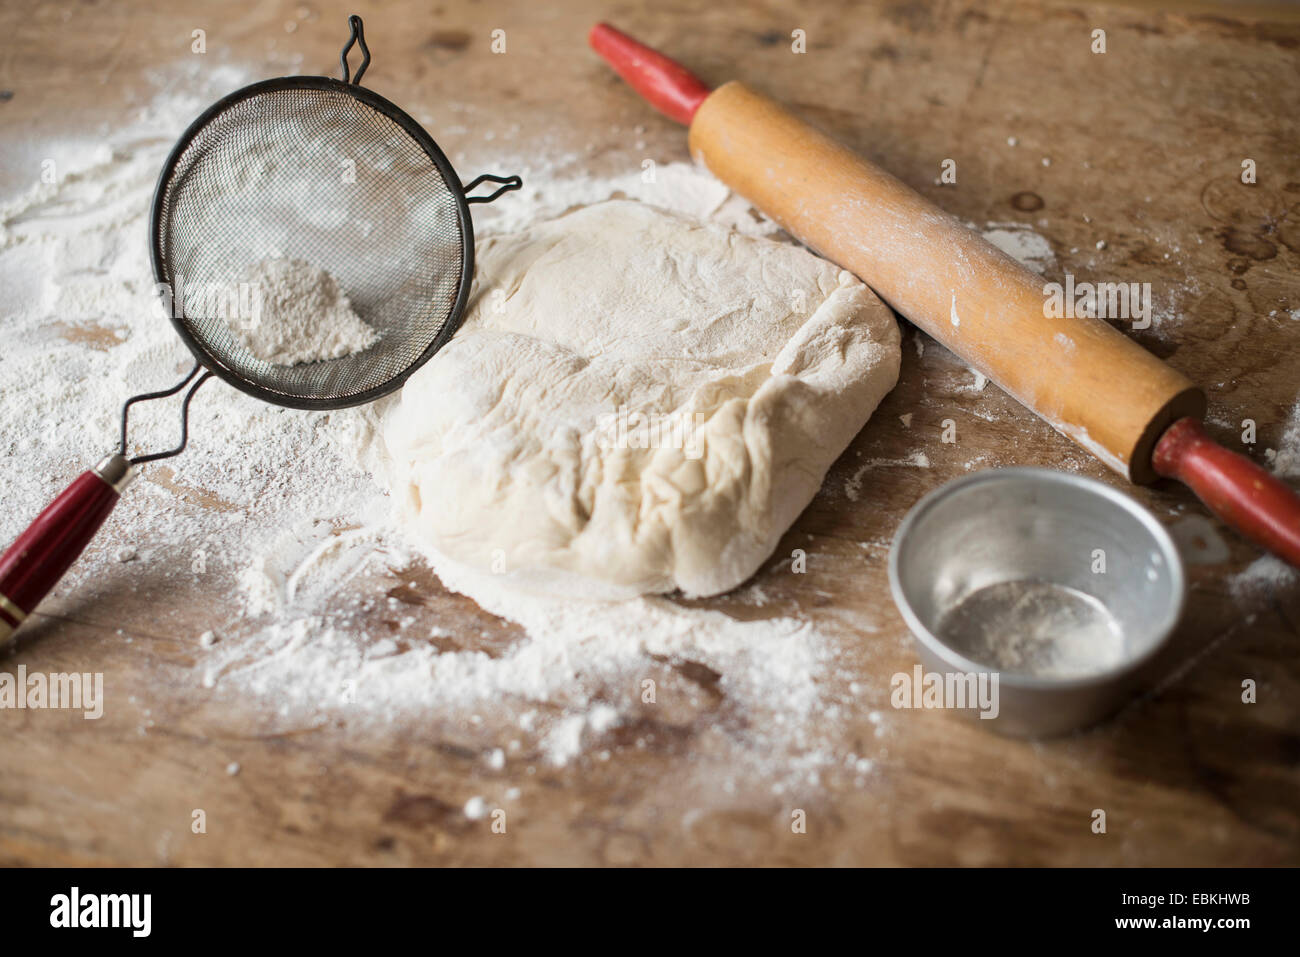 Rolling pin, Strainer and dough on kitchen counter Stock Photo